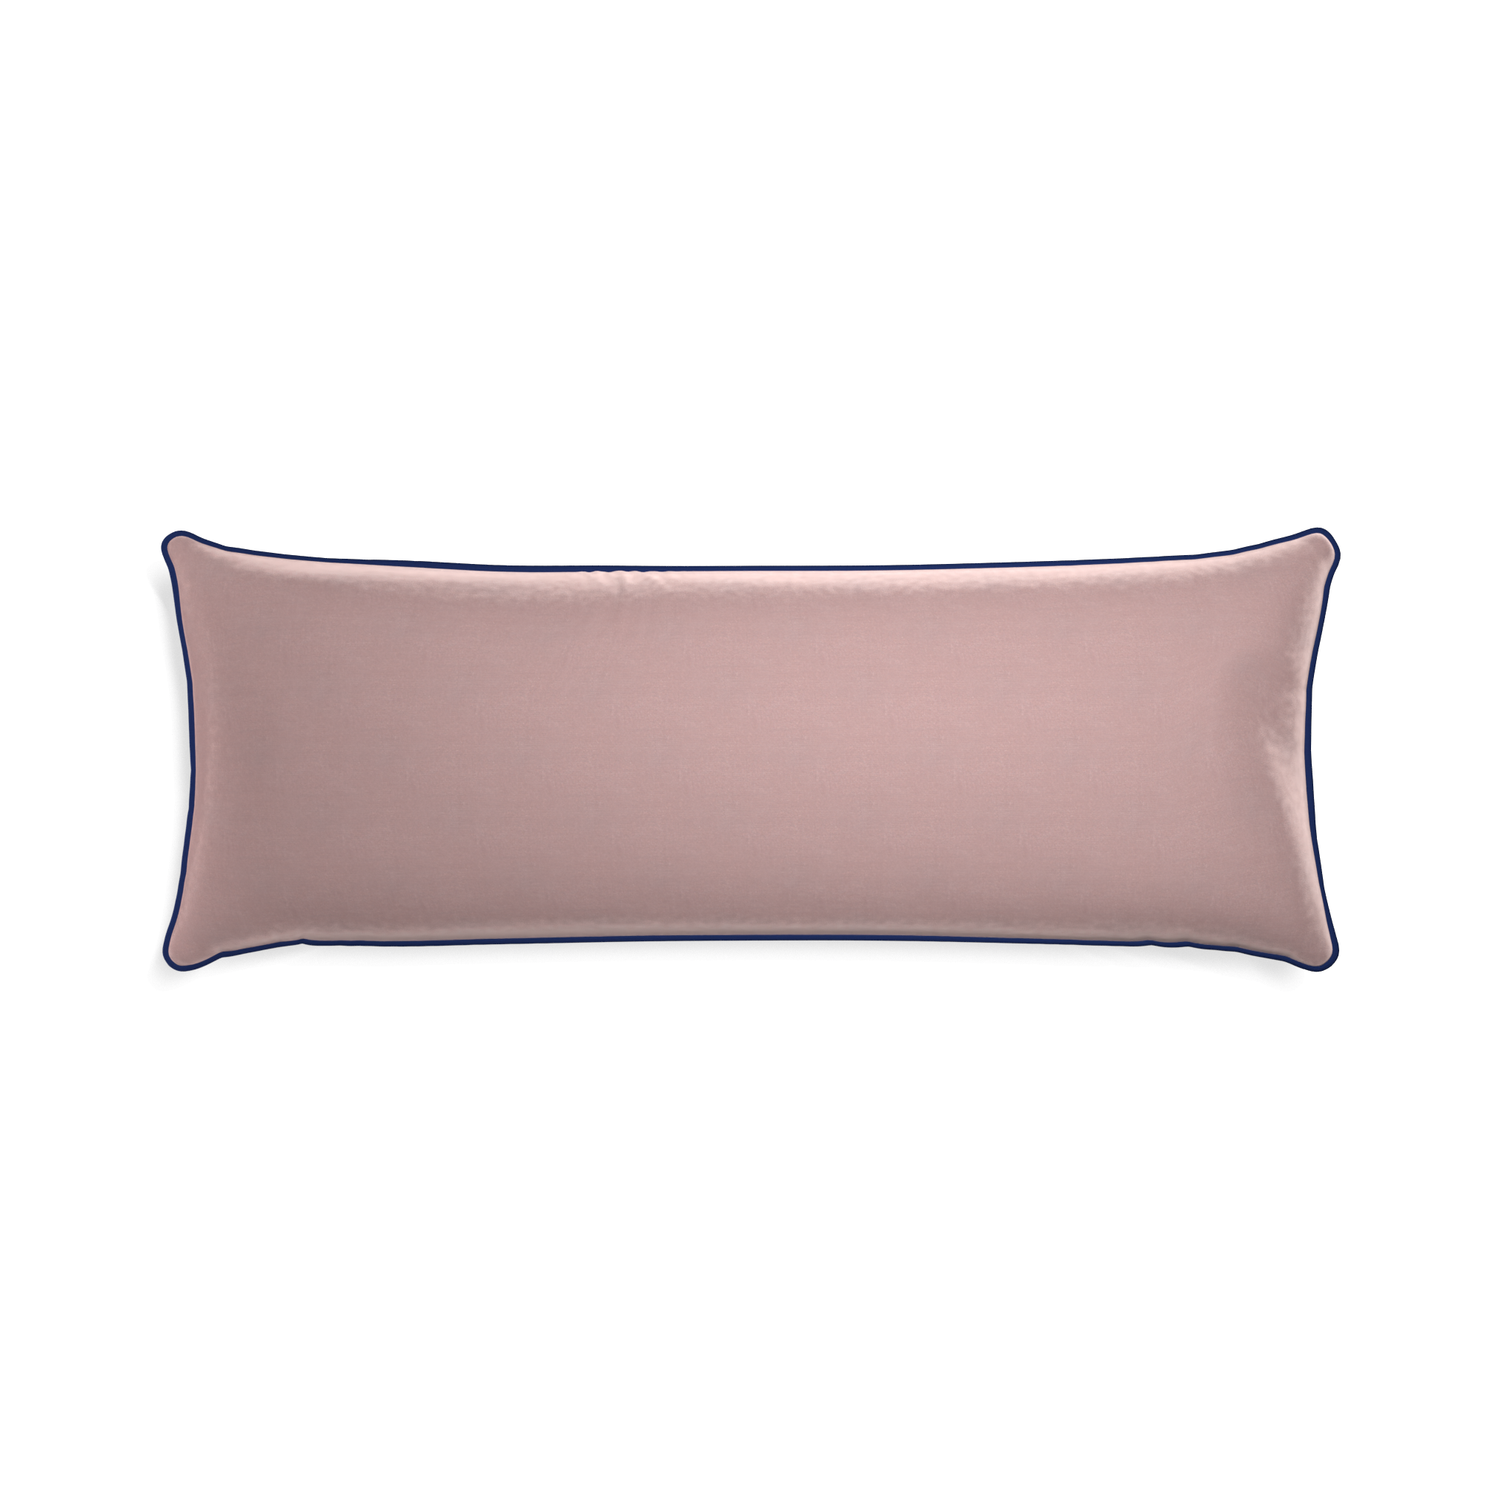 Xl-lumbar mauve velvet custom pillow with midnight piping on white background